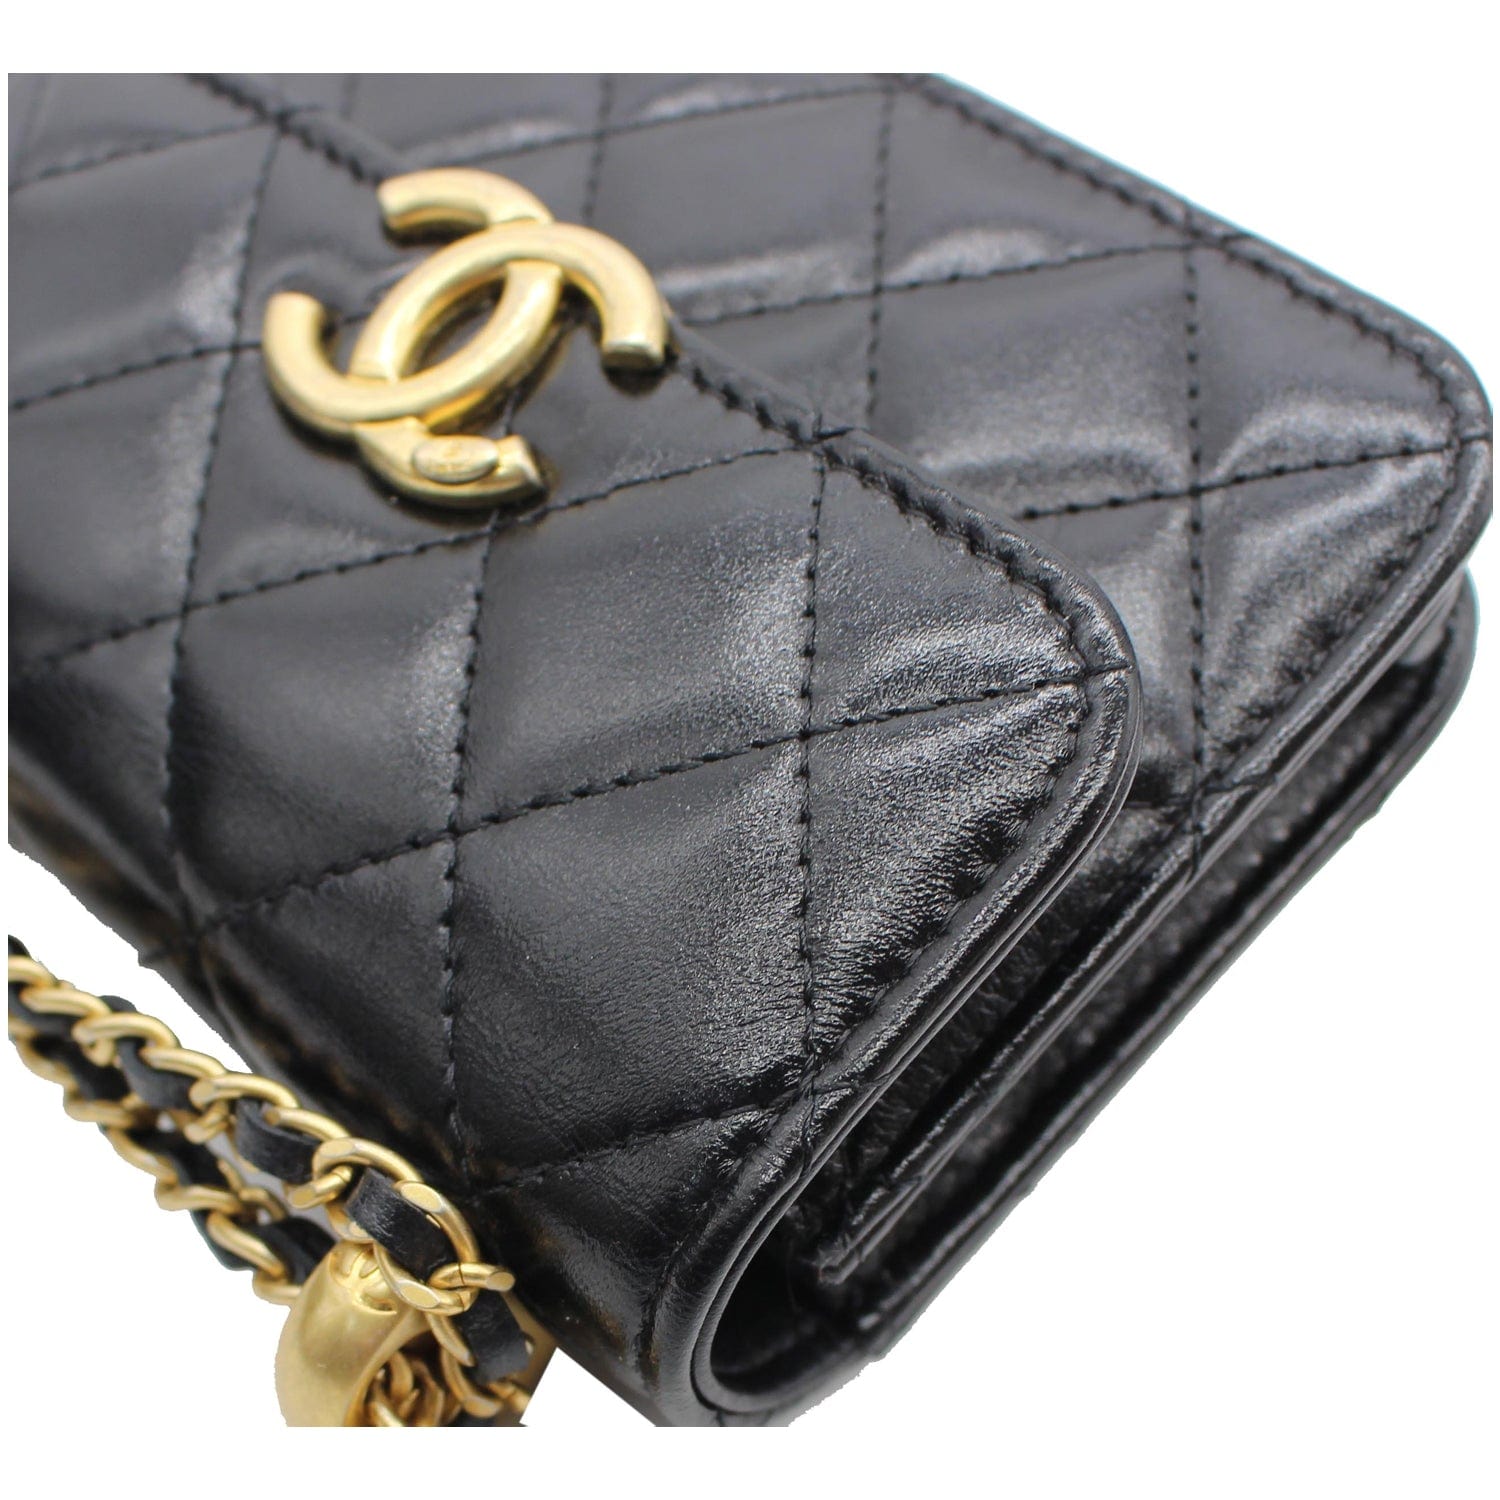 Chanel 21A flap coin purse with chain